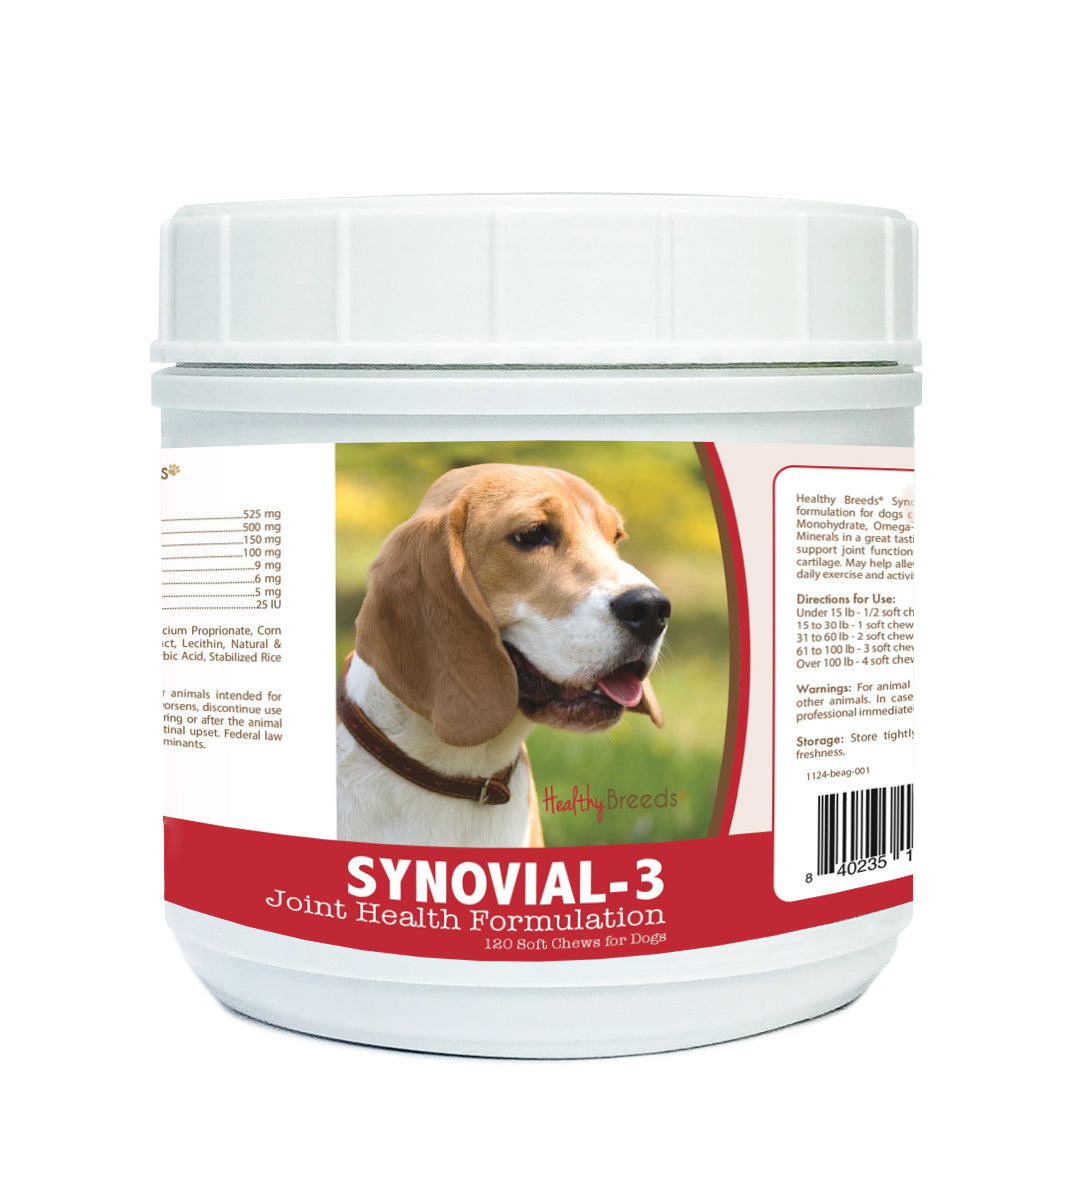 Beagle Synovial-3 Joint Health Formulation Soft Chews 120 Count